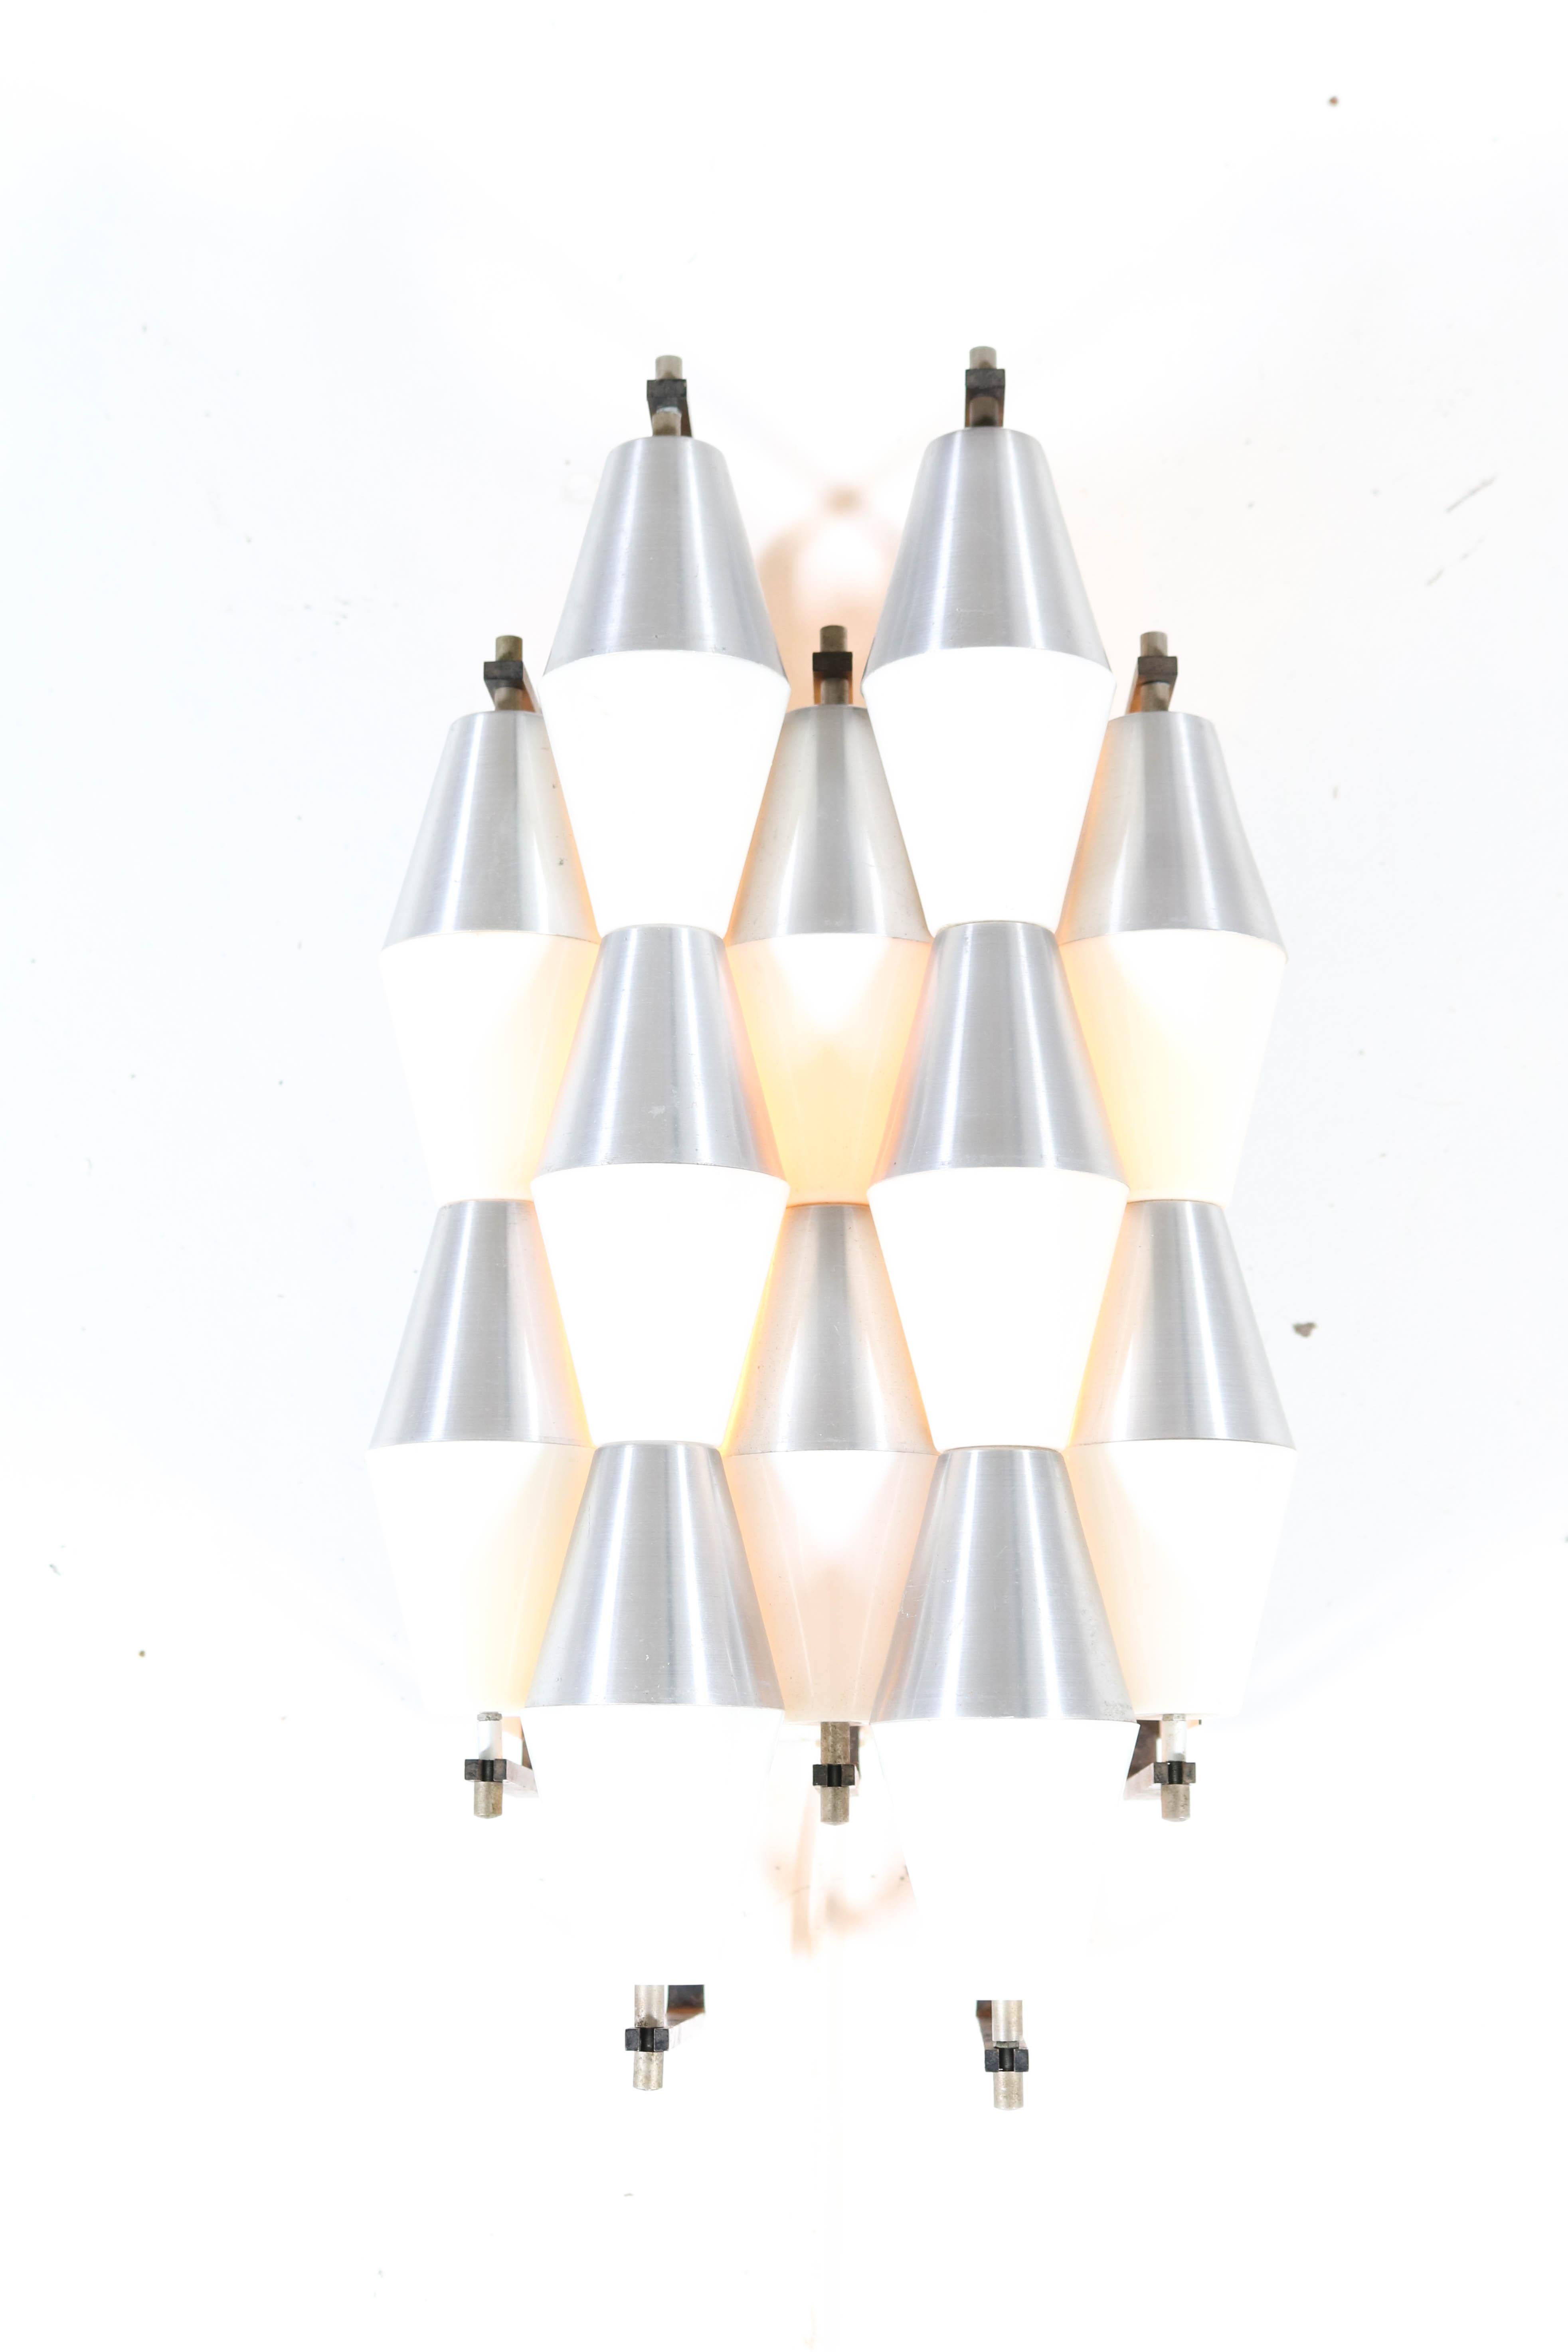 Wonderful and rare Mid-Century Modern wall light or sconce.
Design by RAAK Amsterdam model: Ludiek.
Striking Dutch design from the 1960s.
This combination of plastic and aluminum hoods gives a wonderful effect when lit!
This wall light or sconce